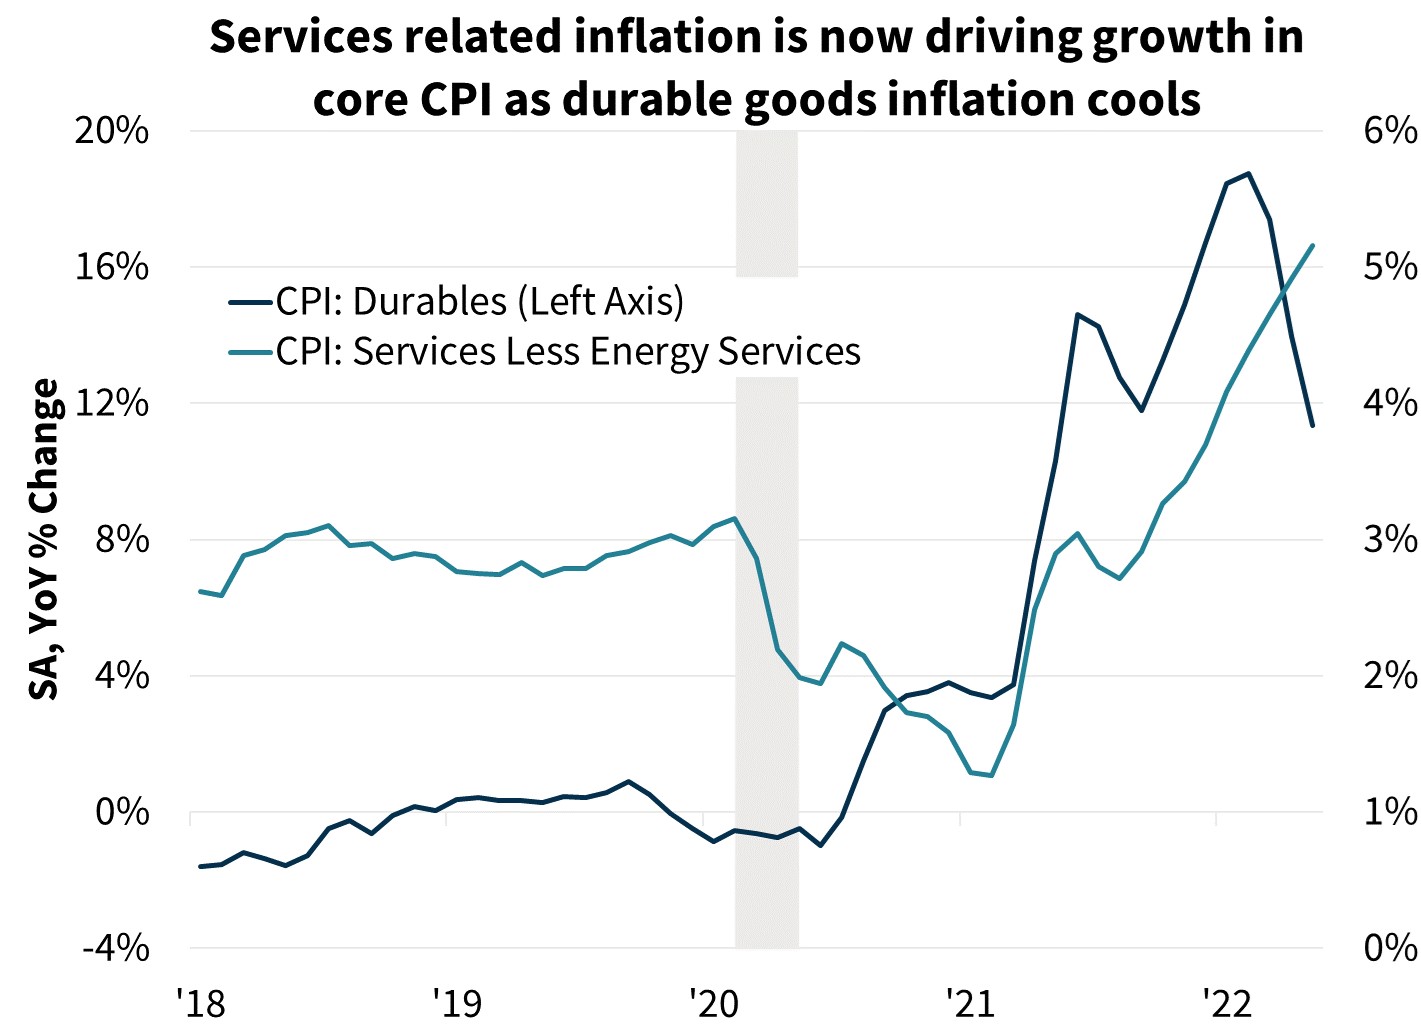  Services related inflation is now driving growth in core CPI as durable goods inflation cools  